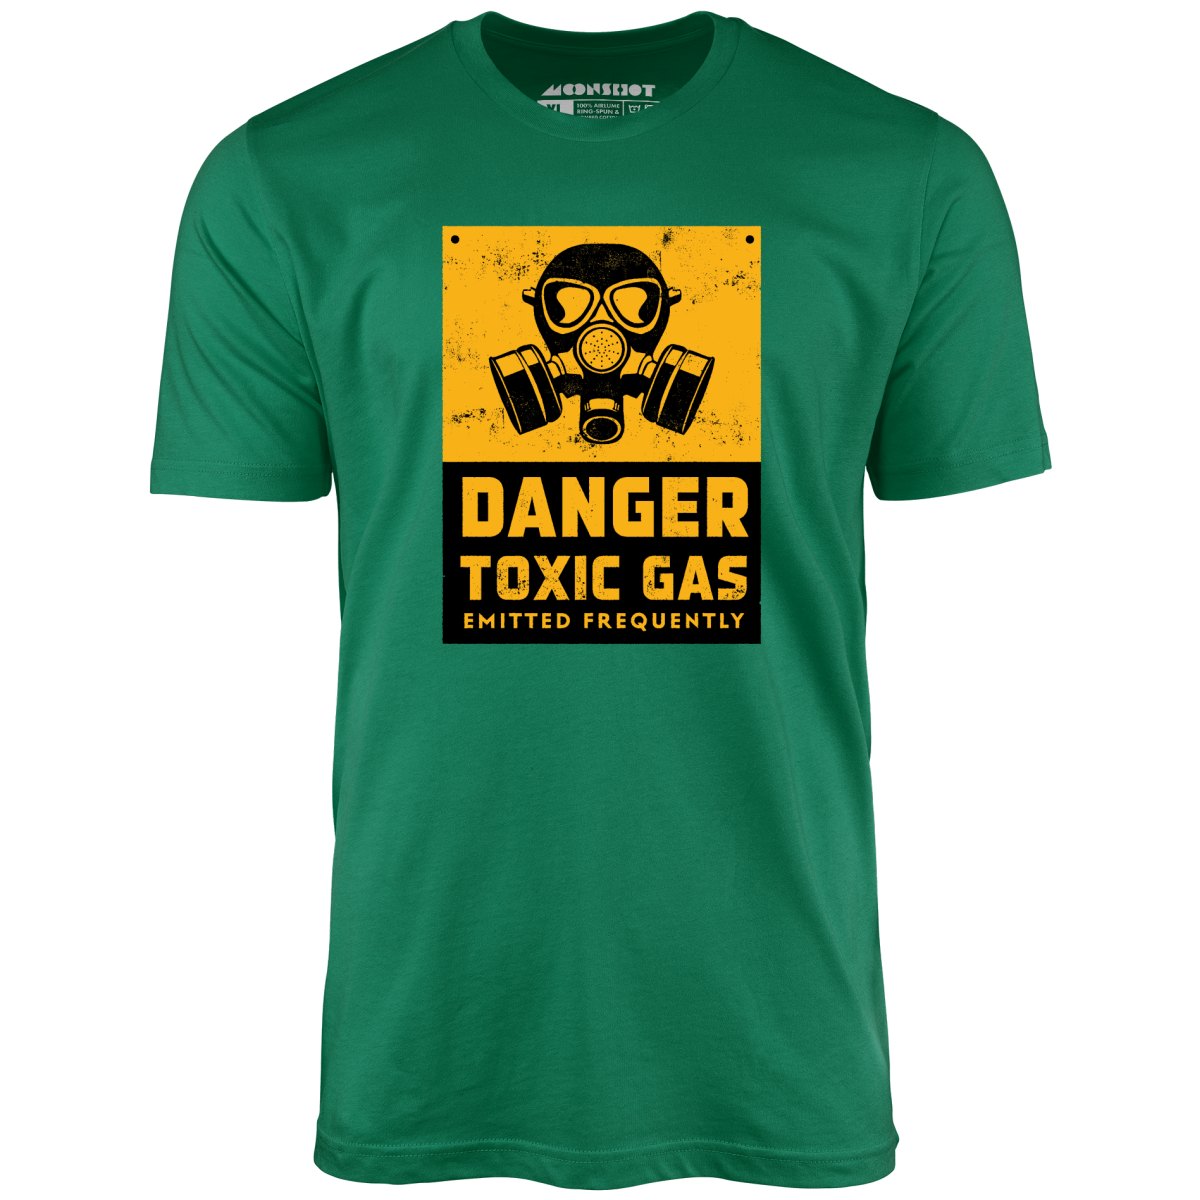 Danger Toxic Gas Emitted Frequently - Unisex T-Shirt